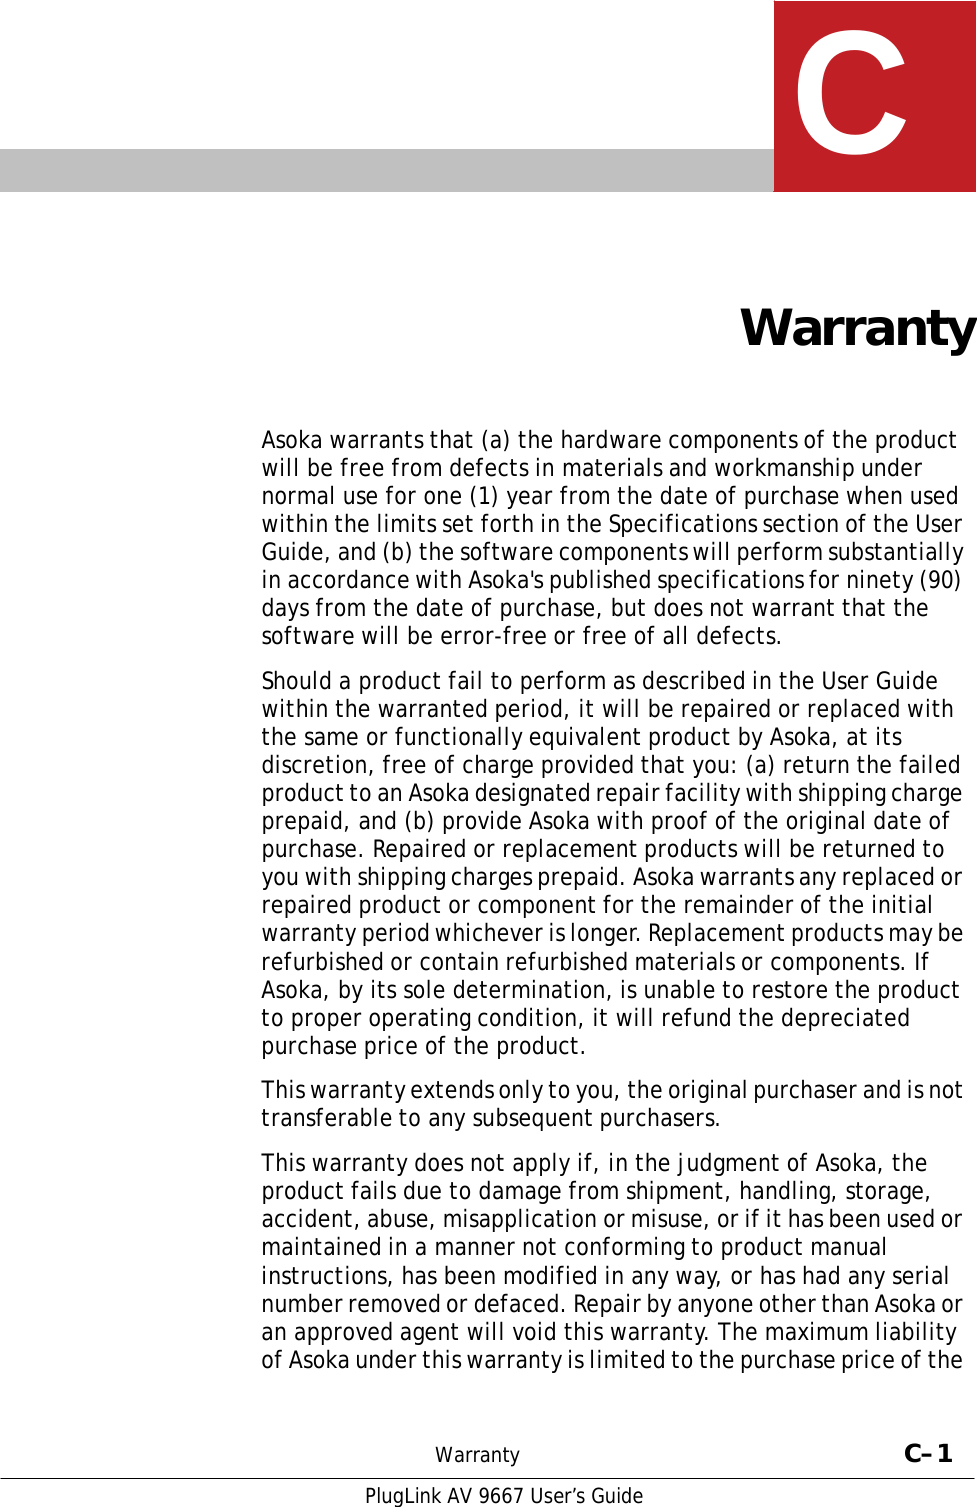   C     Warranty    Asoka warrants that (a) the hardware components of the product will be free from defects in materials and workmanship under normal use for one (1) year from the date of purchase when used within the limits set forth in the Specifications section of the User Guide, and (b) the software components will perform substantially in accordance with Asoka&apos;s published specifications for ninety (90) days from the date of purchase, but does not warrant that the software will be error-free or free of all defects.  Should a product fail to perform as described in the User Guide within the warranted period, it will be repaired or replaced with the same or functionally equivalent product by Asoka, at its discretion, free of charge provided that you: (a) return the failed product to an Asoka designated repair facility with shipping charge prepaid, and (b) provide Asoka with proof of the original date of purchase. Repaired or replacement products will be returned to you with shipping charges prepaid. Asoka warrants any replaced or repaired product or component for the remainder of the initial warranty period whichever is longer. Replacement products may be refurbished or contain refurbished materials or components. If Asoka, by its sole determination, is unable to restore the product to proper operating condition, it will refund the depreciated purchase price of the product.  This warranty extends only to you, the original purchaser and is not transferable to any subsequent purchasers.  This warranty does not apply if, in the judgment of Asoka, the product fails due to damage from shipment, handling, storage, accident, abuse, misapplication or misuse, or if it has been used or maintained in a manner not conforming to product manual instructions, has been modified in any way, or has had any serial number removed or defaced. Repair by anyone other than Asoka or an approved agent will void this warranty. The maximum liability of Asoka under this warranty is limited to the purchase price of the    Warranty  C–1  PlugLink AV 9667 User’s Guide 